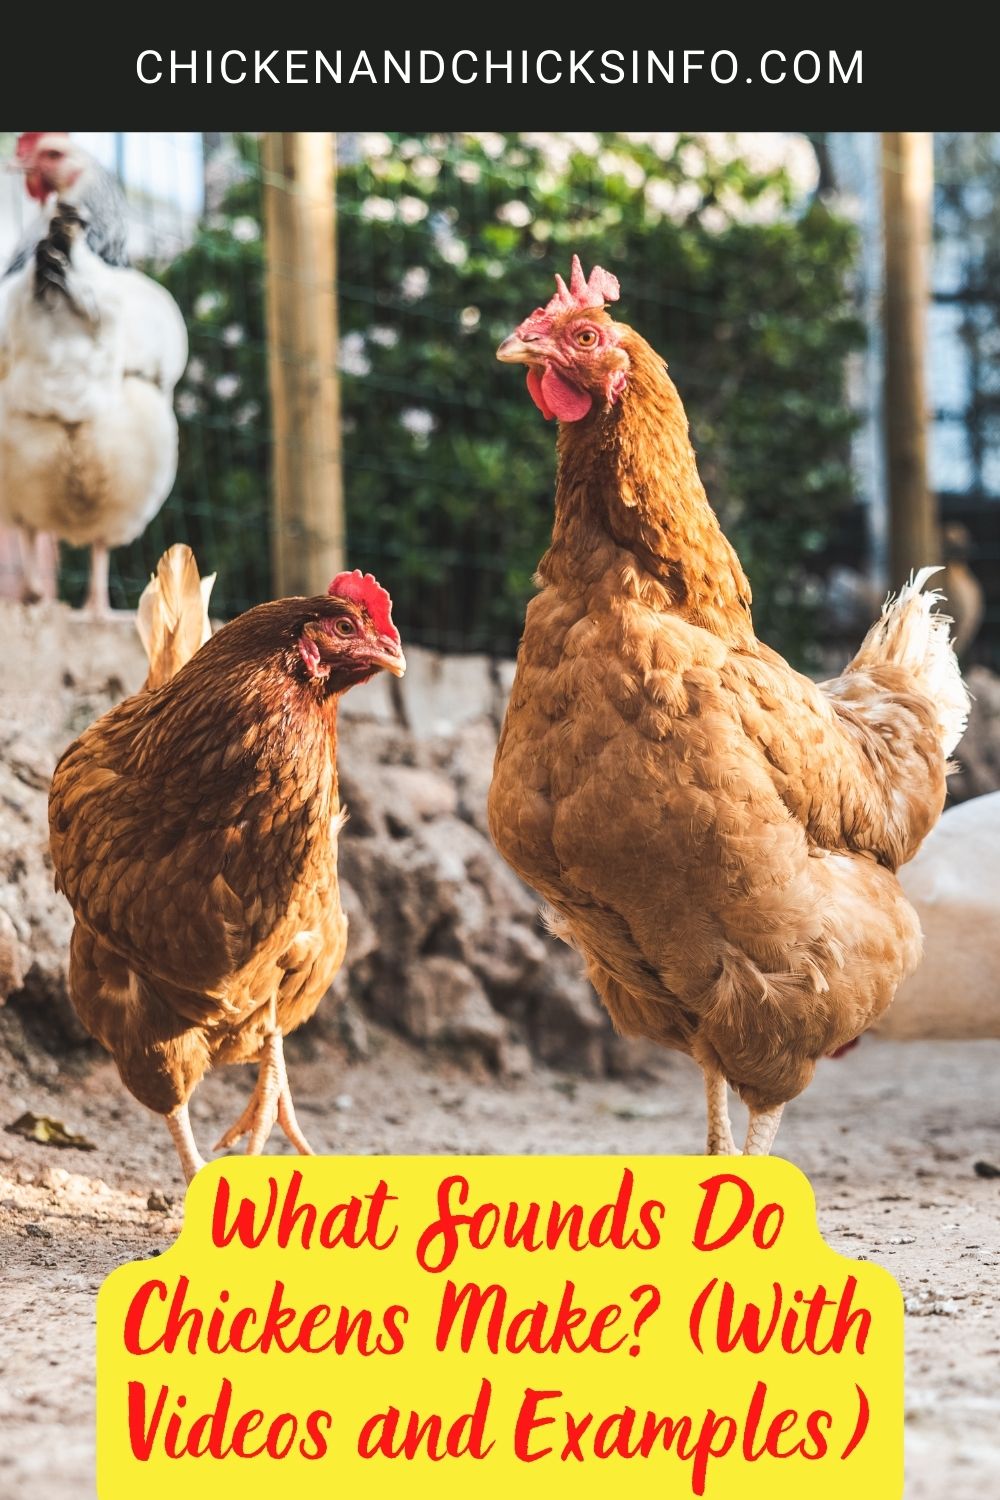 What Sounds Do Chickens Make? (With Videos and Examples) poster.
